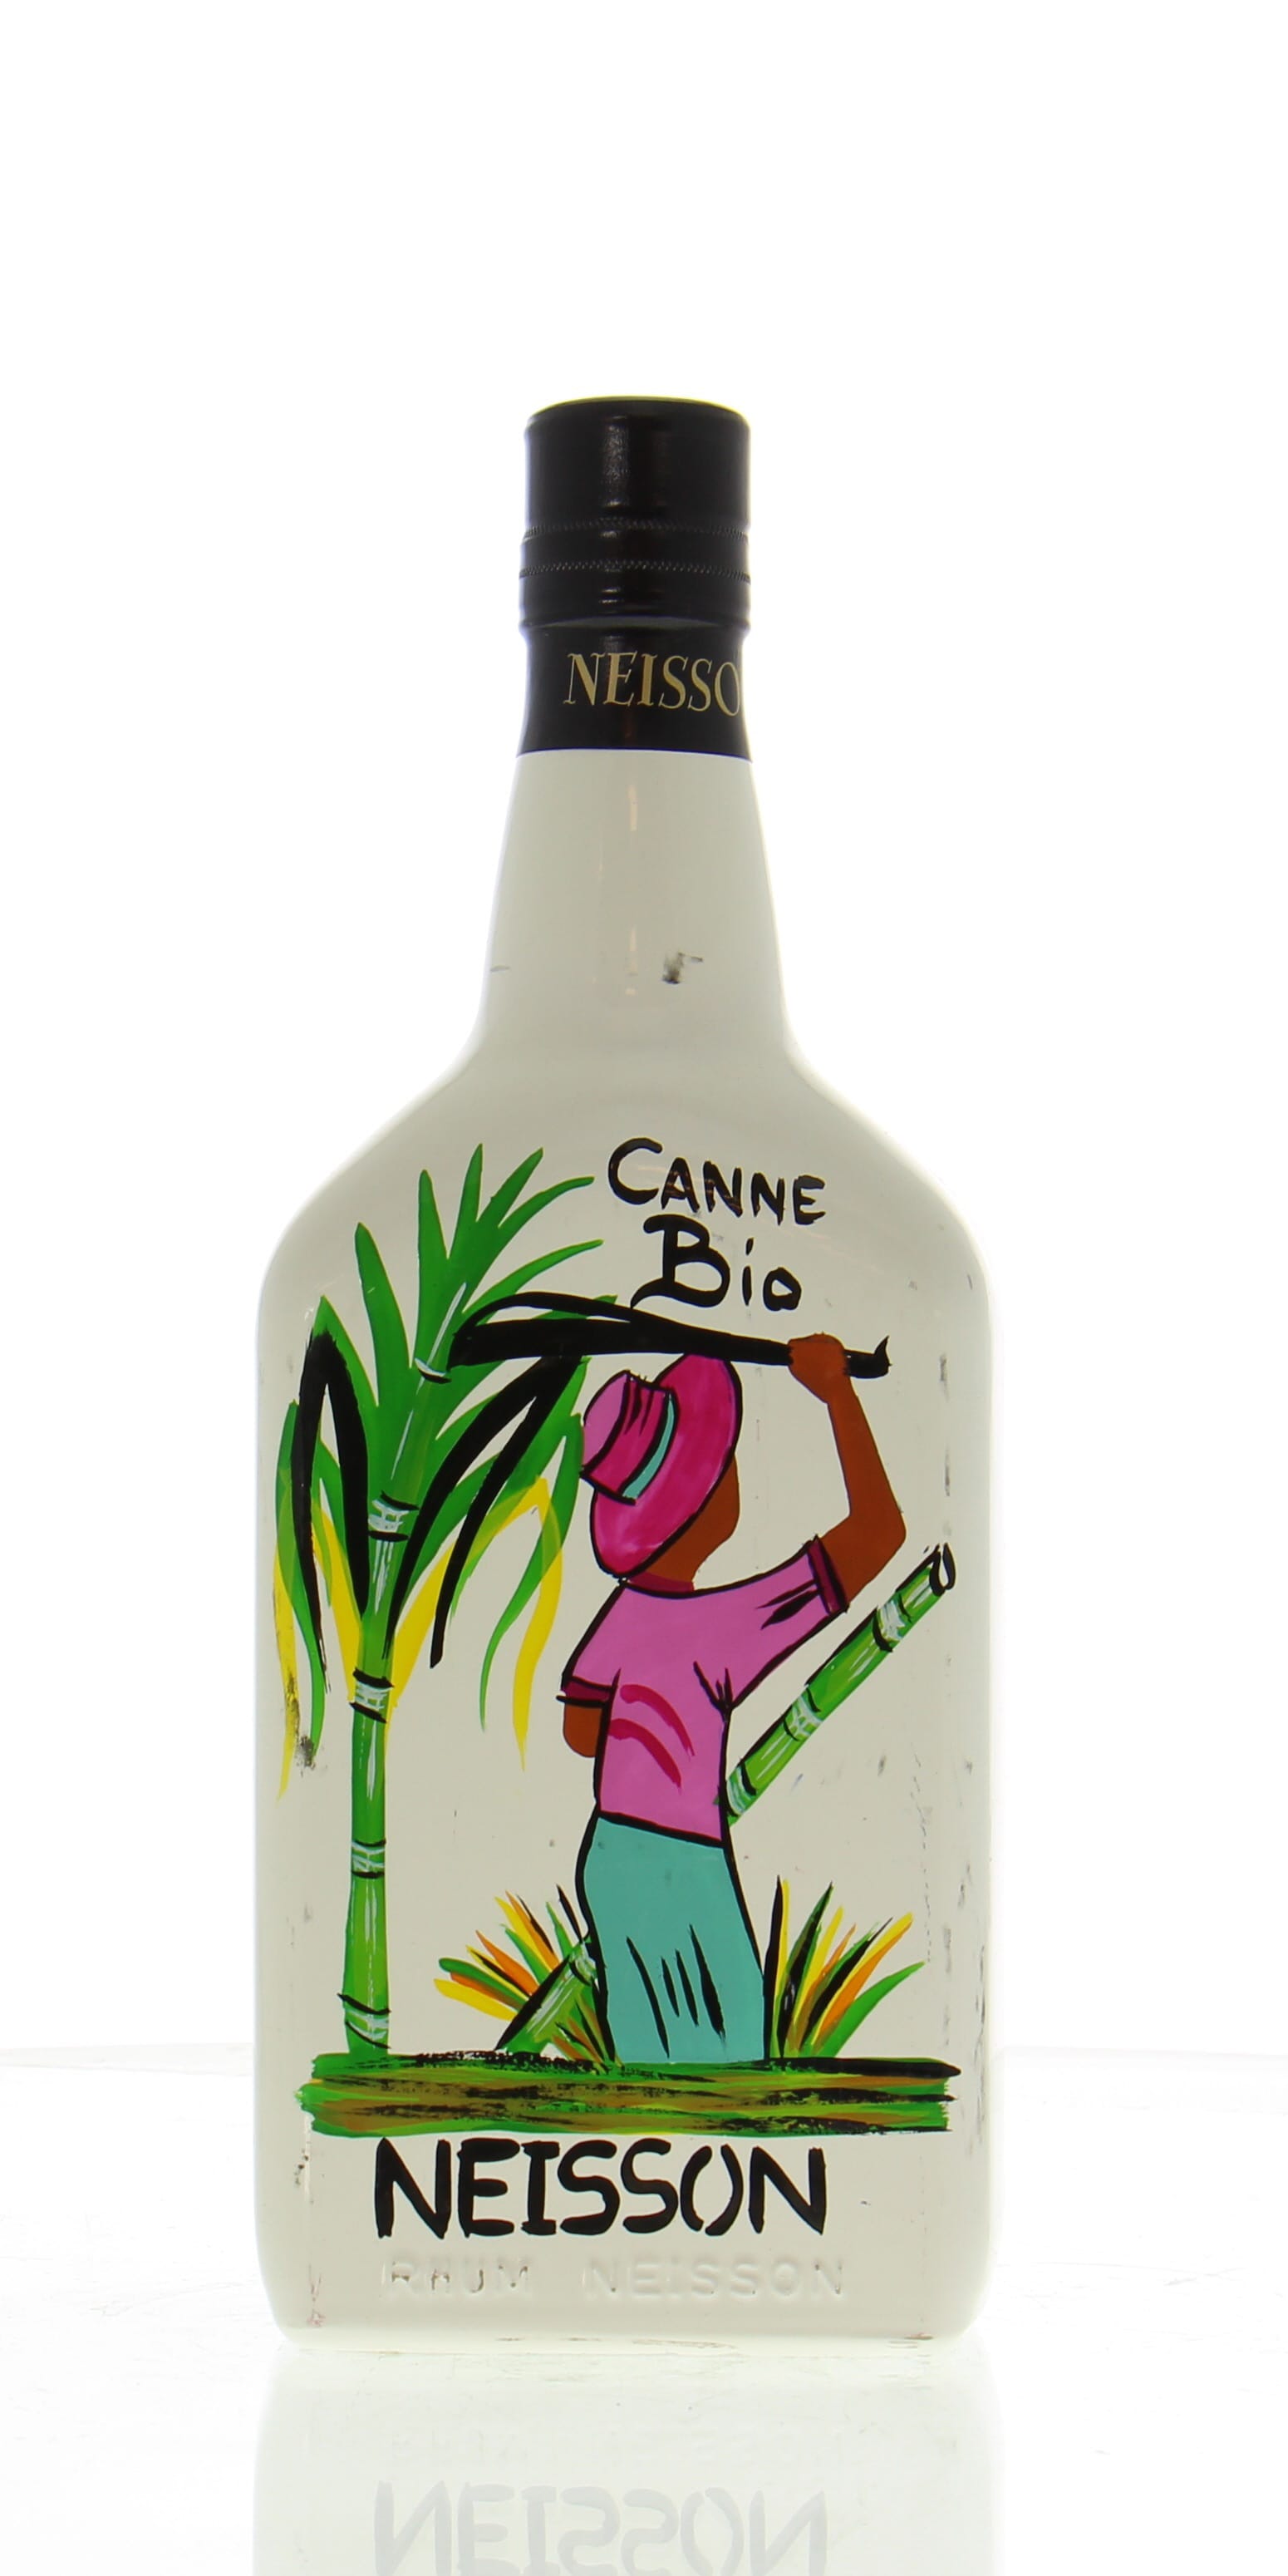 Thieubert Carbet Neisson - Rhum Agricole Canne Bio Bottled for 60th Anniversary of La Maison du Whisky 55% NV